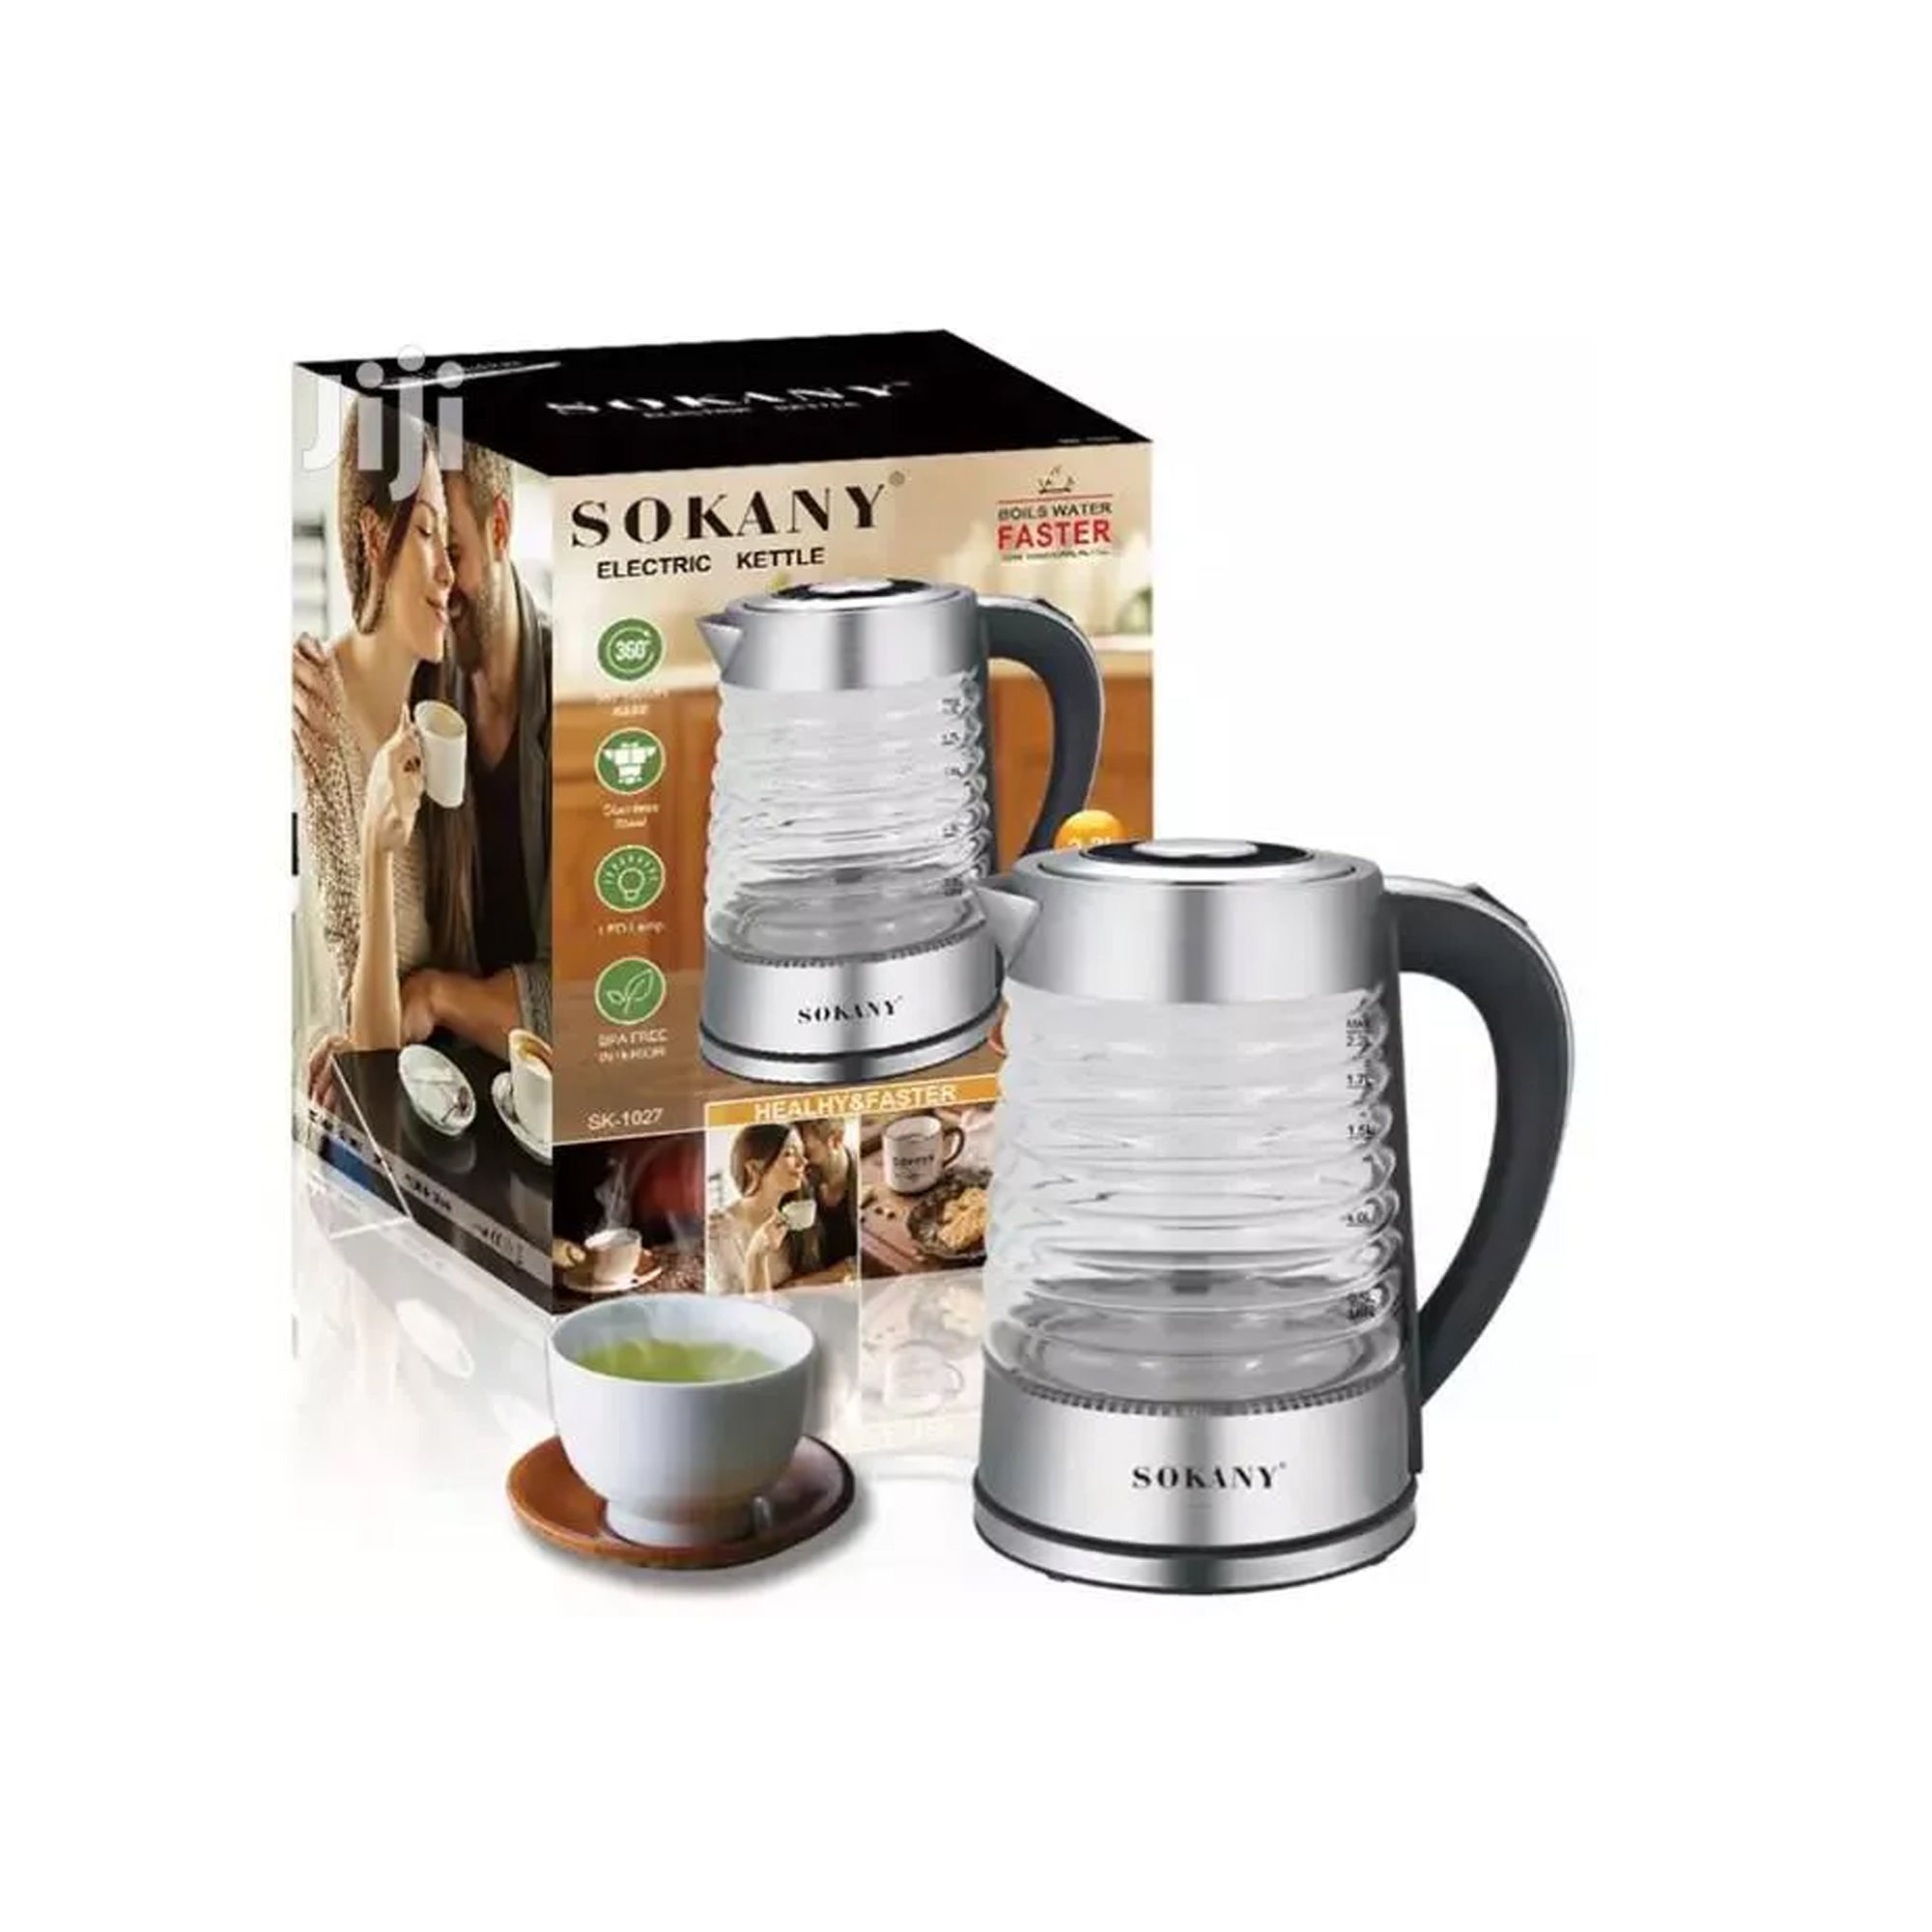 SOKANY SK-1027 2.2L Electric Kettle 2200W 220V Hot Water Kettle Electric Boiler Made of Glass & Stainless Steel, Large Capacity Water Boiler Heater